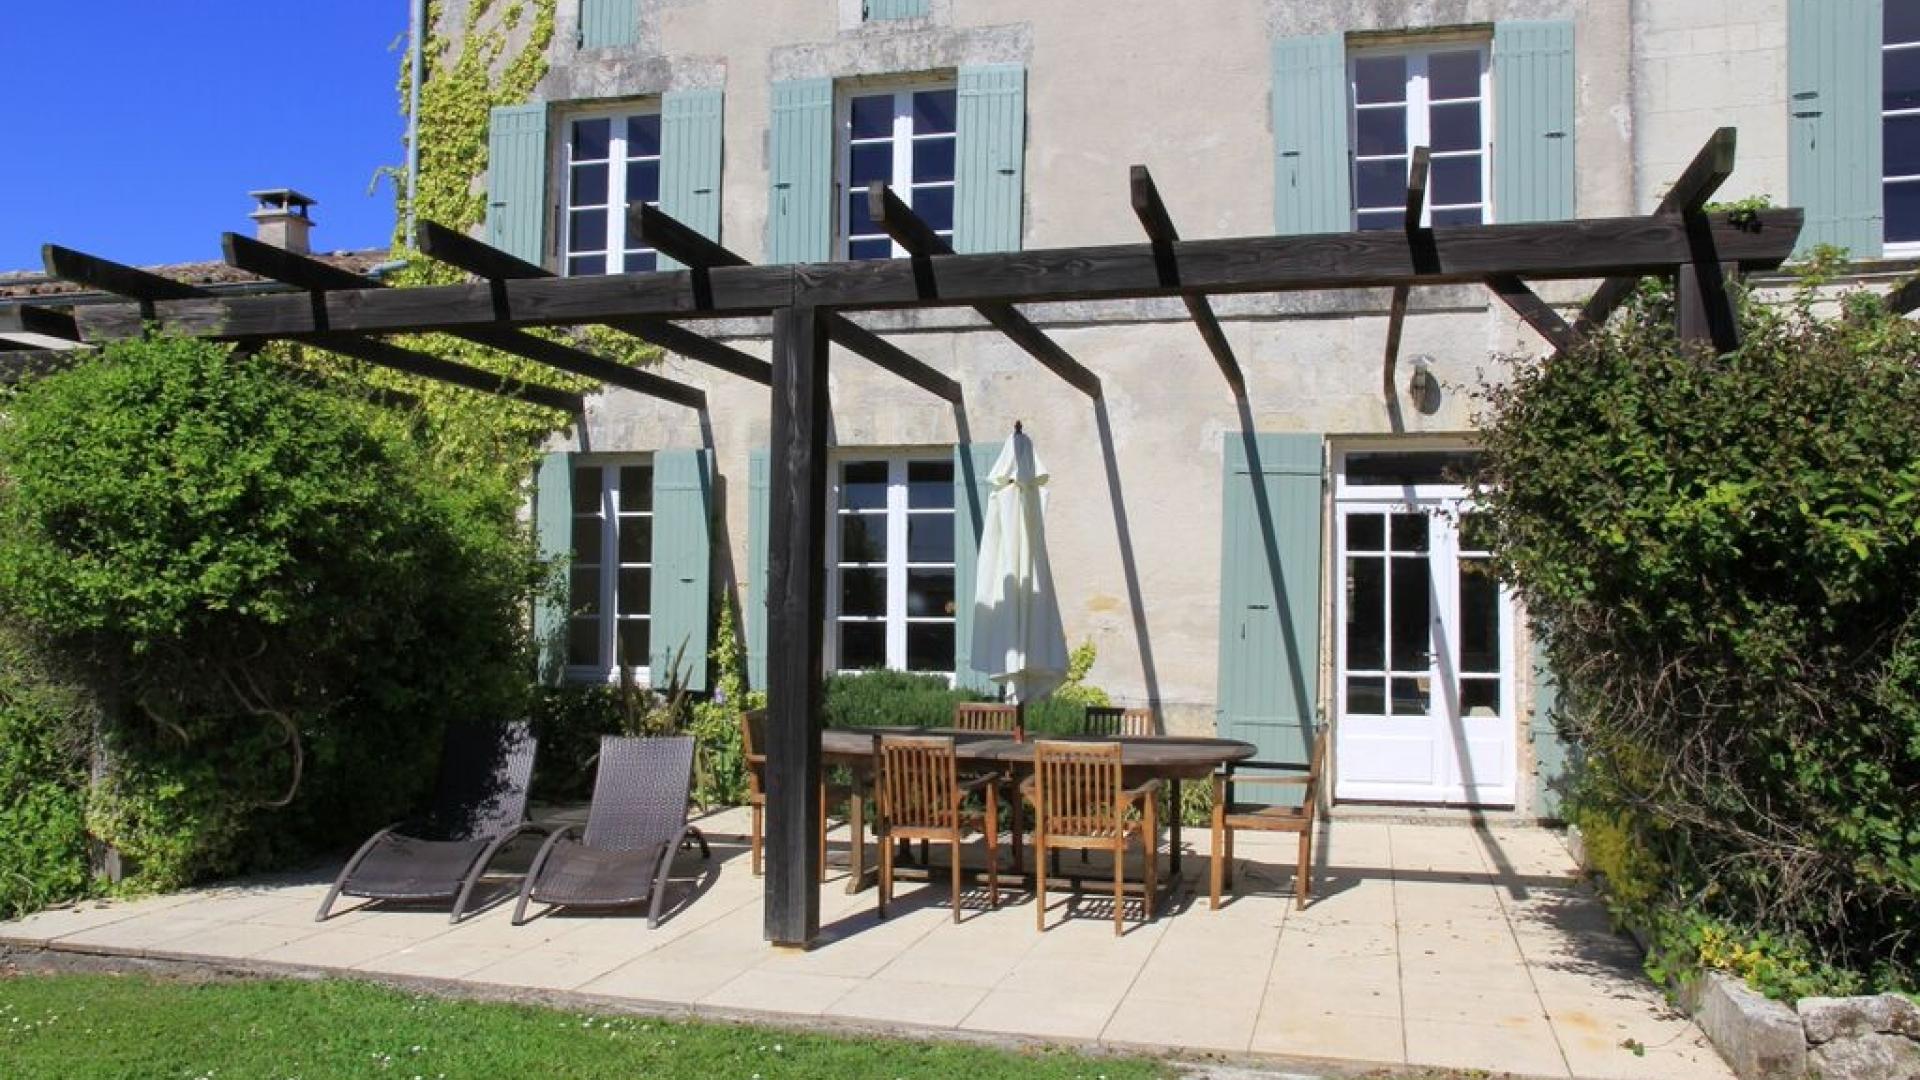 3 Bedroom Cottage/shared facilities in Poitou-Charentes, France